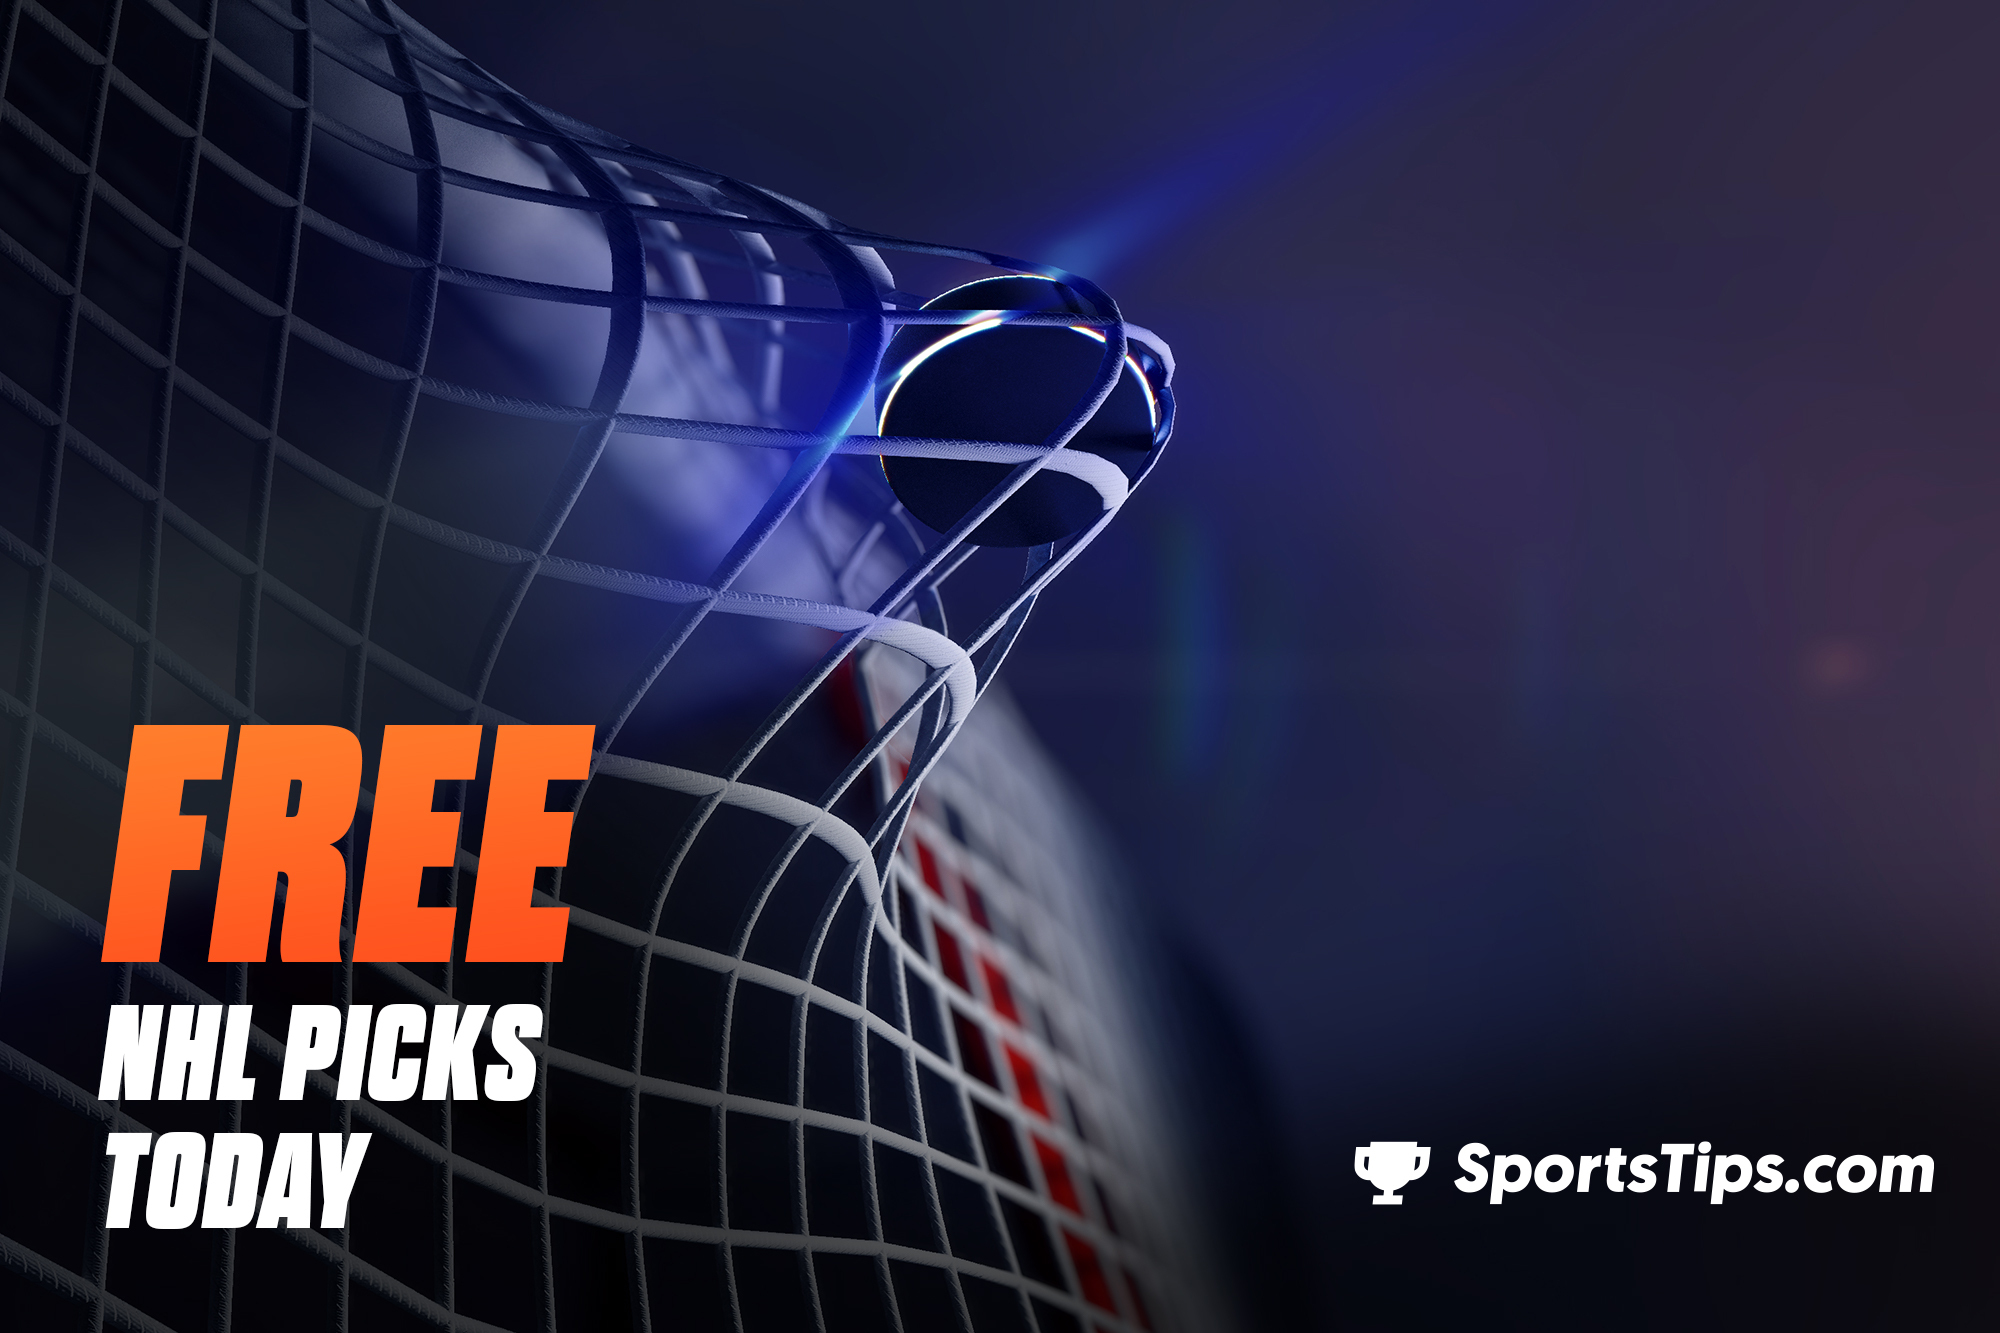 Free NHL Picks Today for Saturday, December 18th, 2021